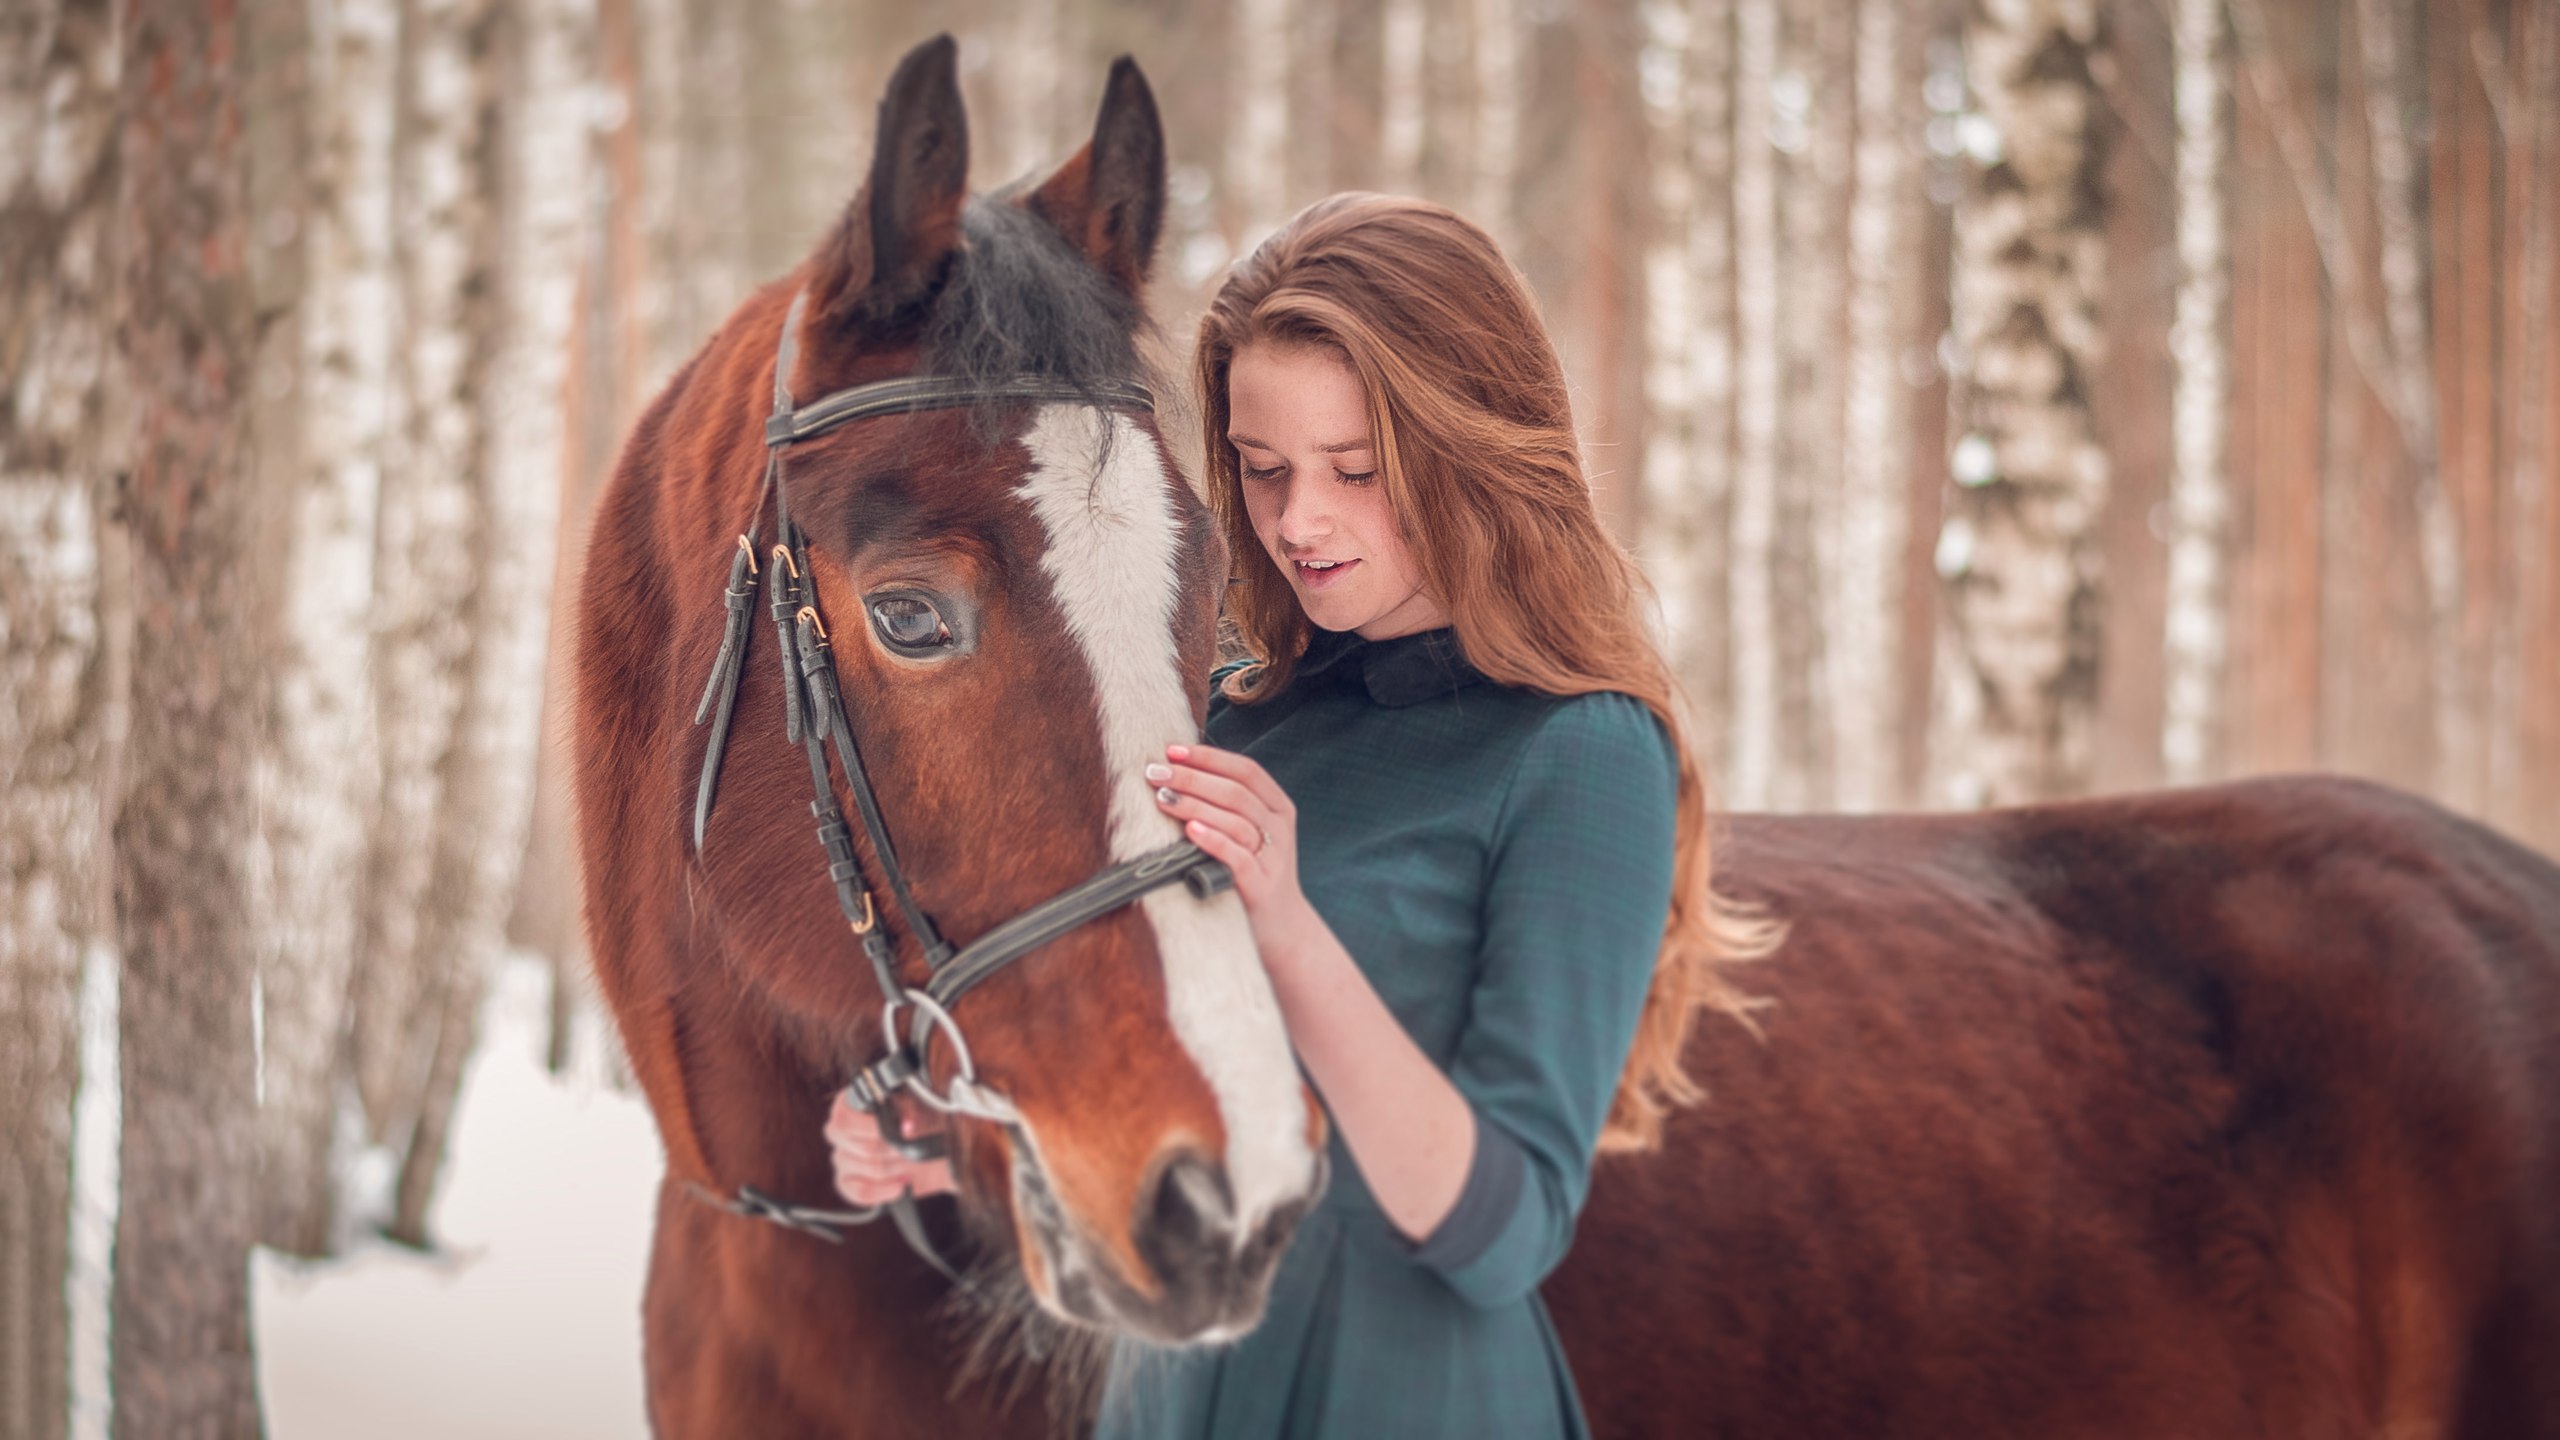 People 2560x1440 horse women women outdoors Artemy Mostovoy women with horse